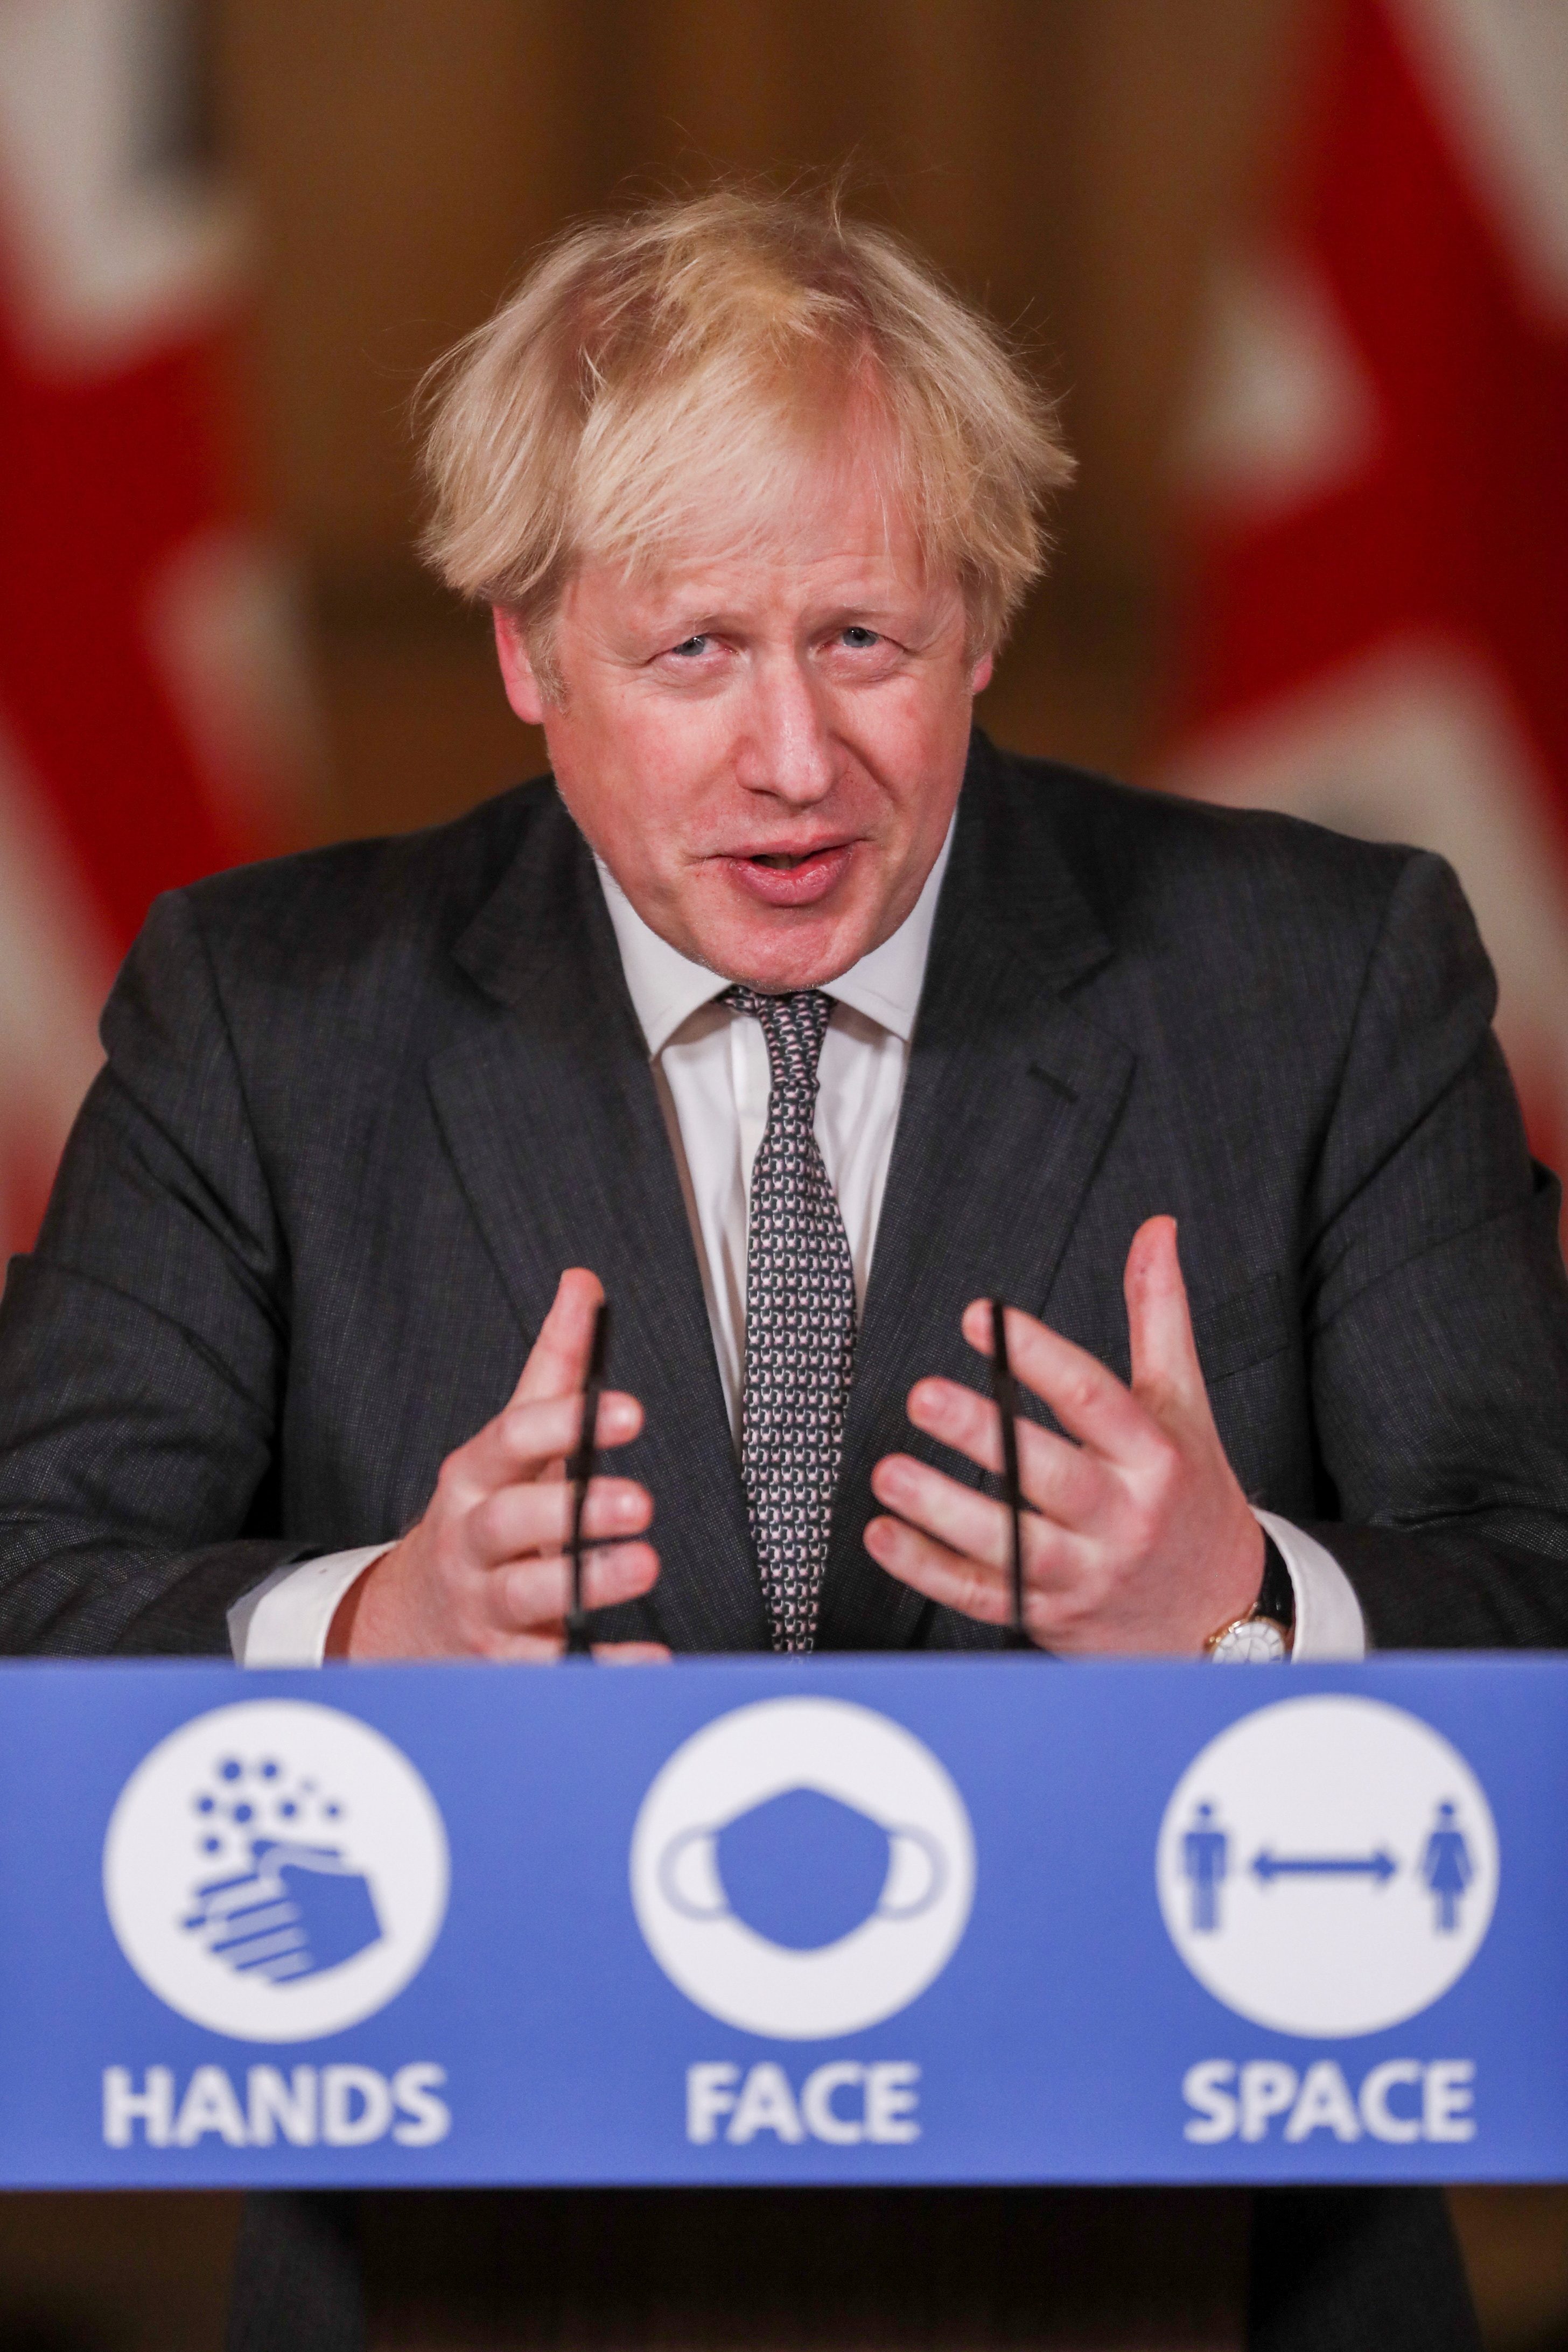 Tougher lockdown restriction likely on the way – Boris Johnson